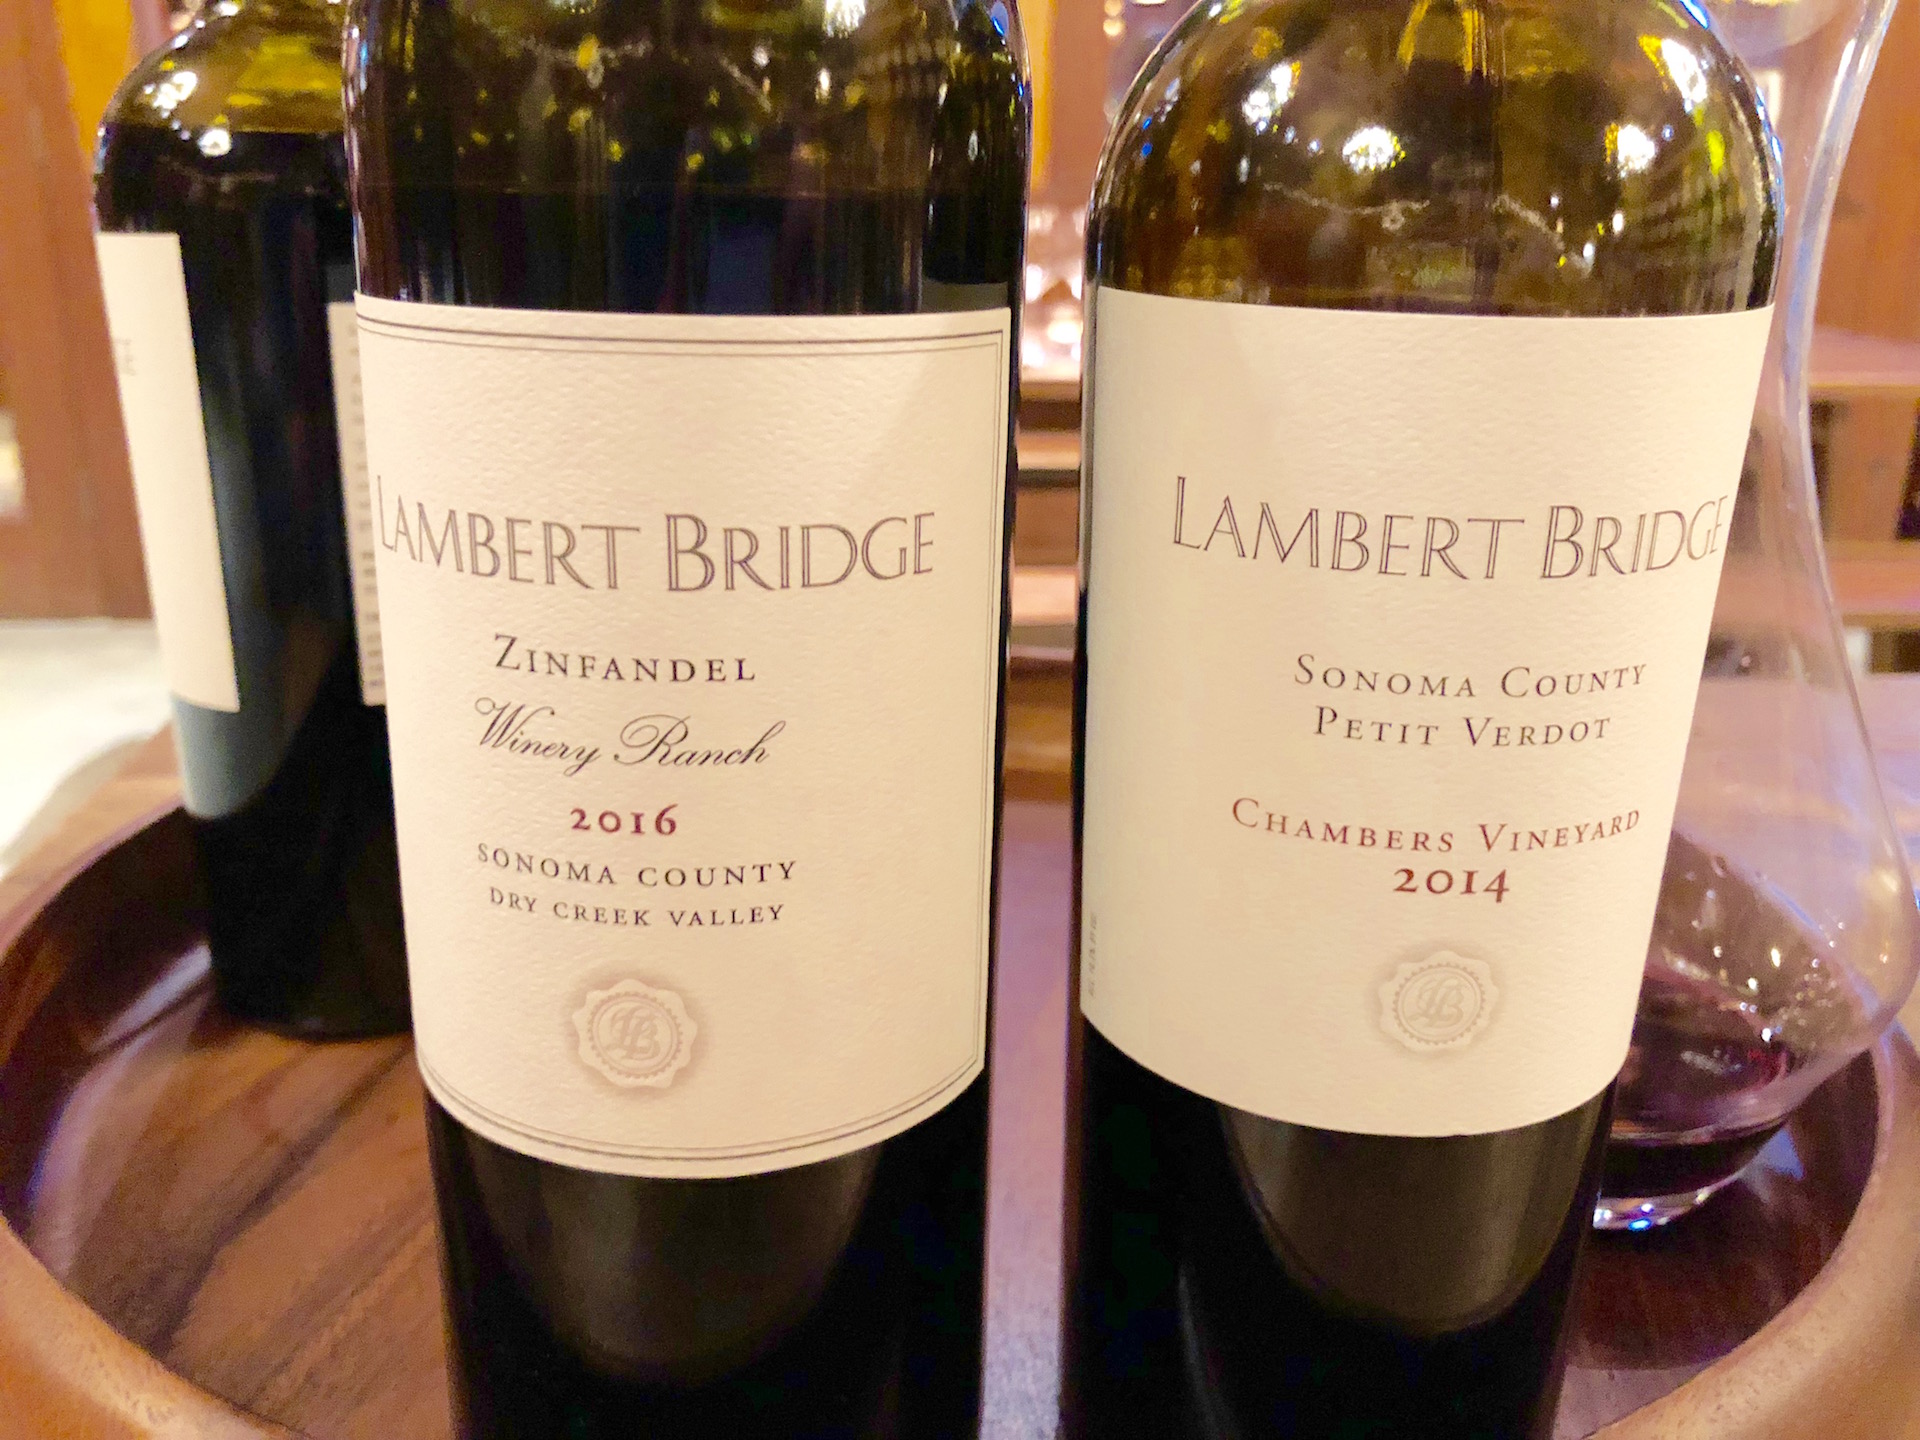 Two standouts at Lambert Bridge Winery in the Dry Creek Valley: a 2016 Winery Ranch Zinfandel and 2014 Chambers Petit Verdot